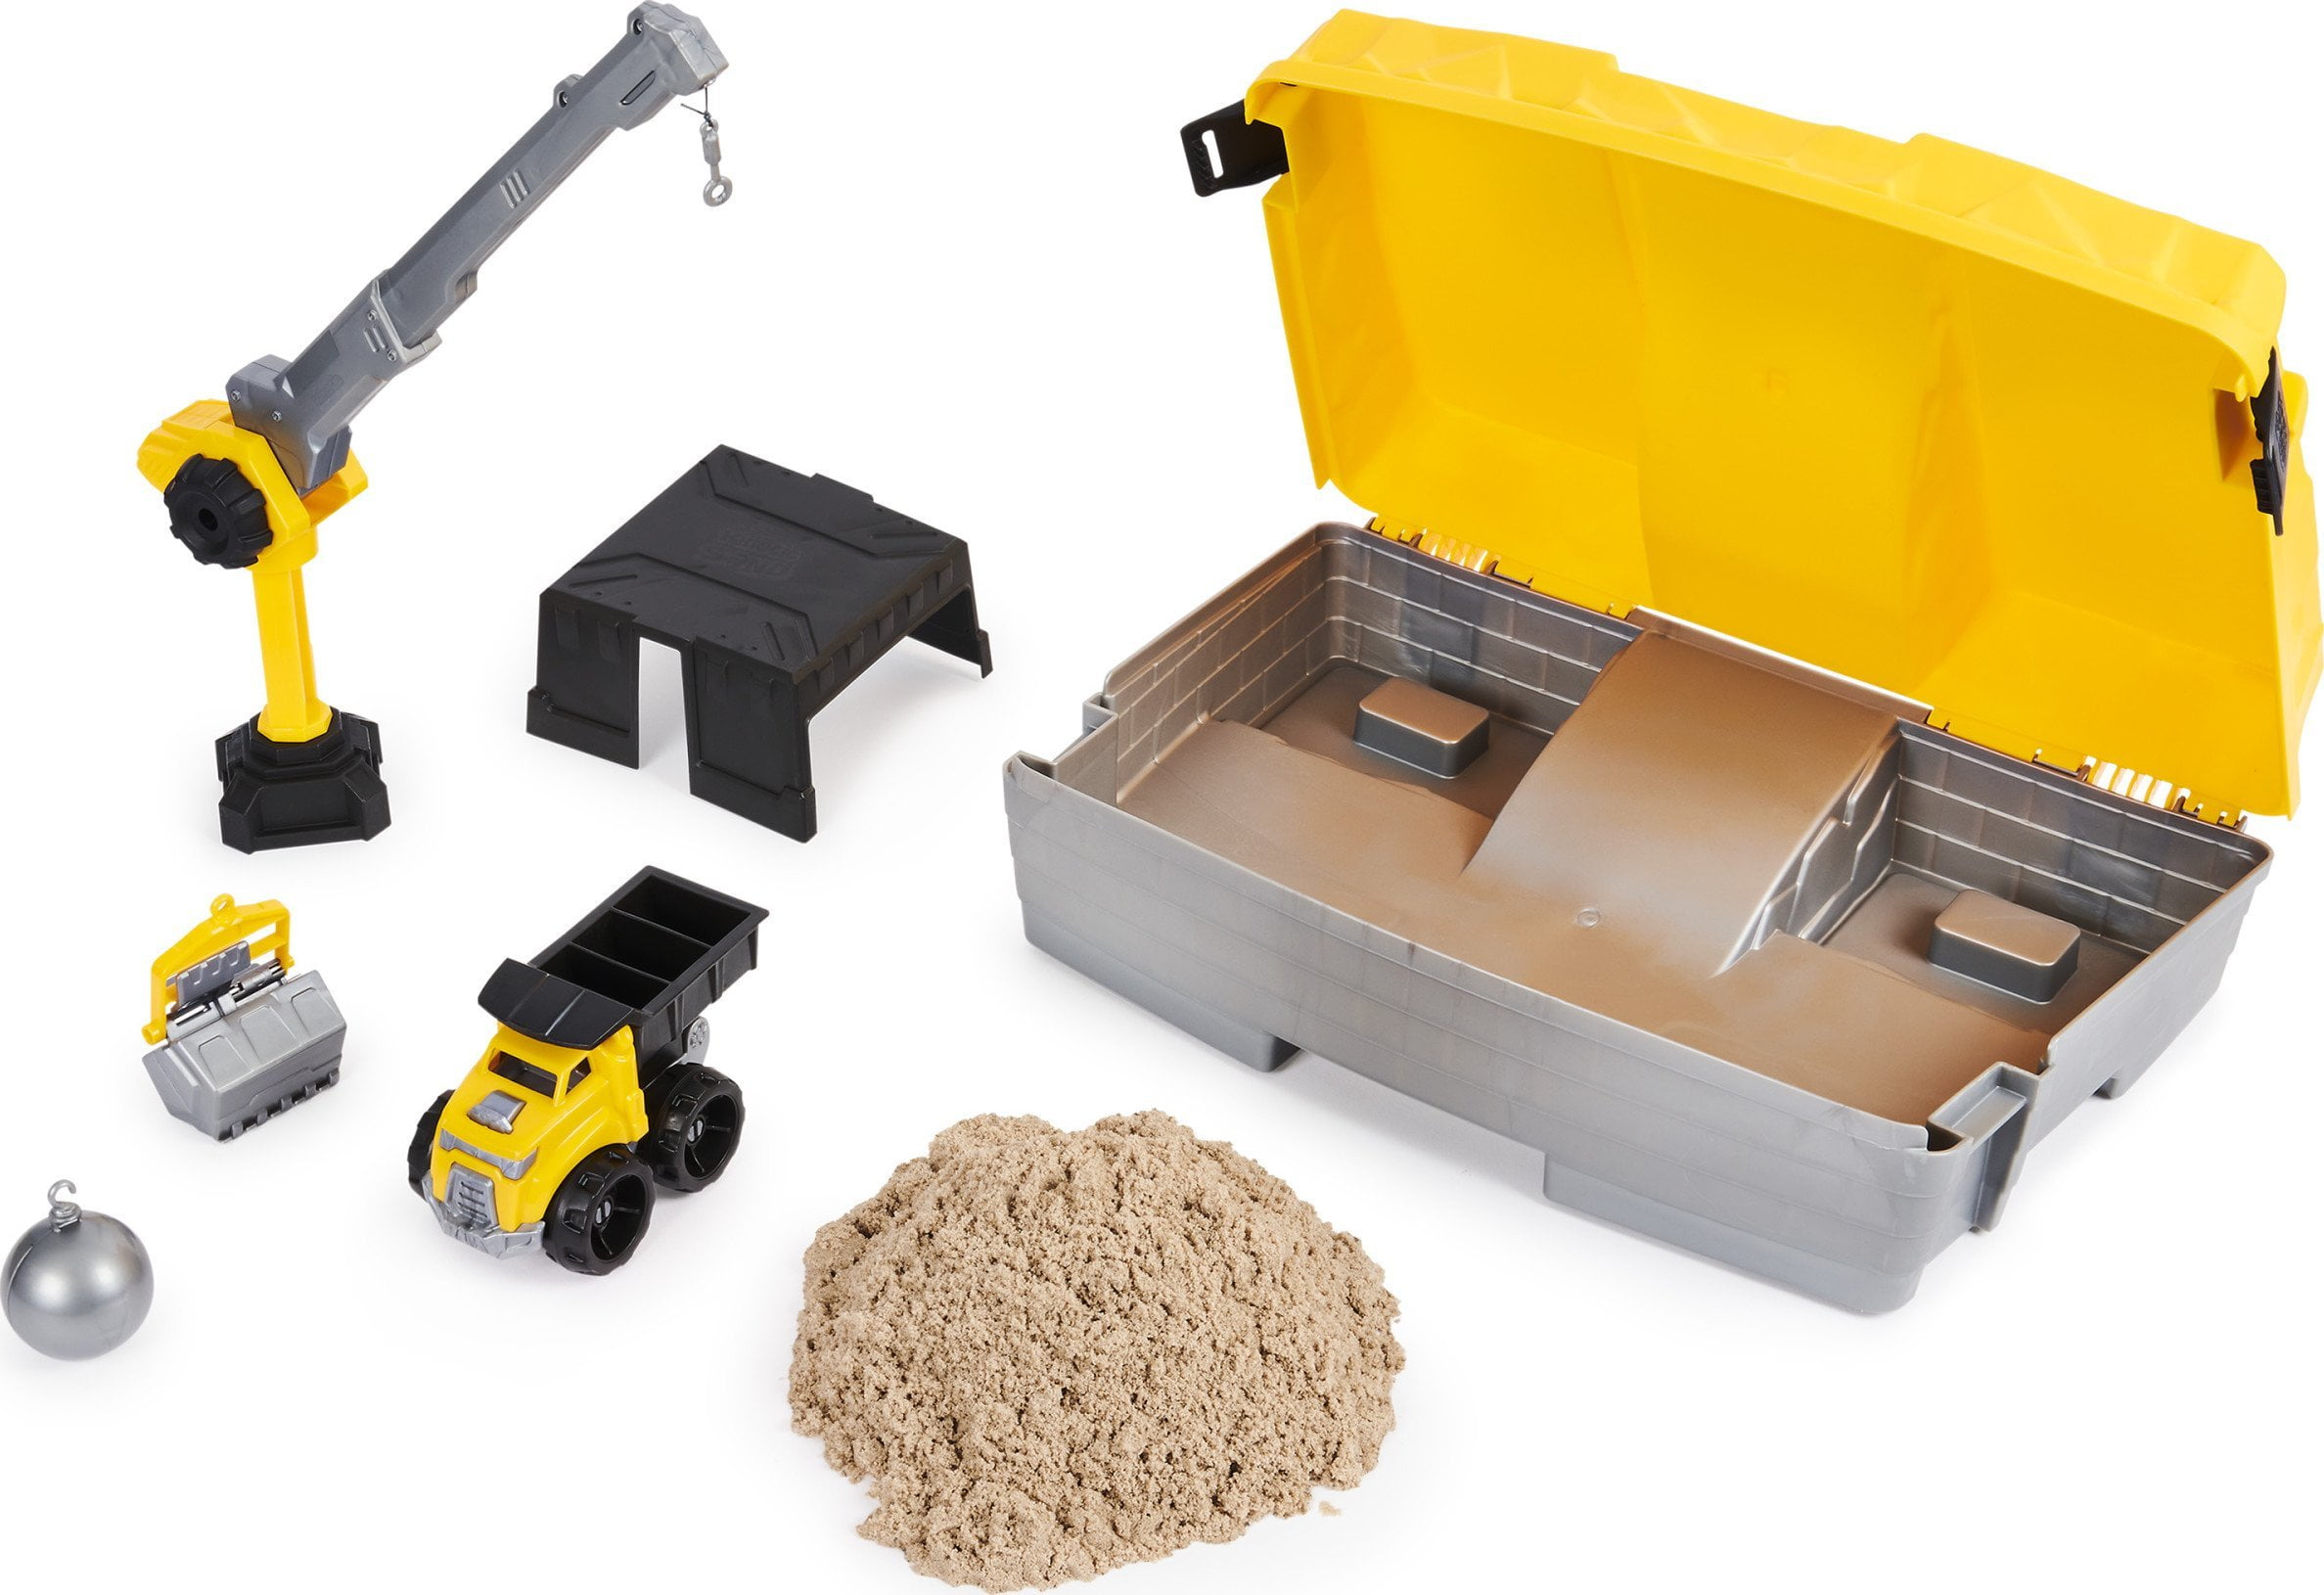 Kinetic Sand FOLDING SANDBOX & Pave and Play Construction Set with